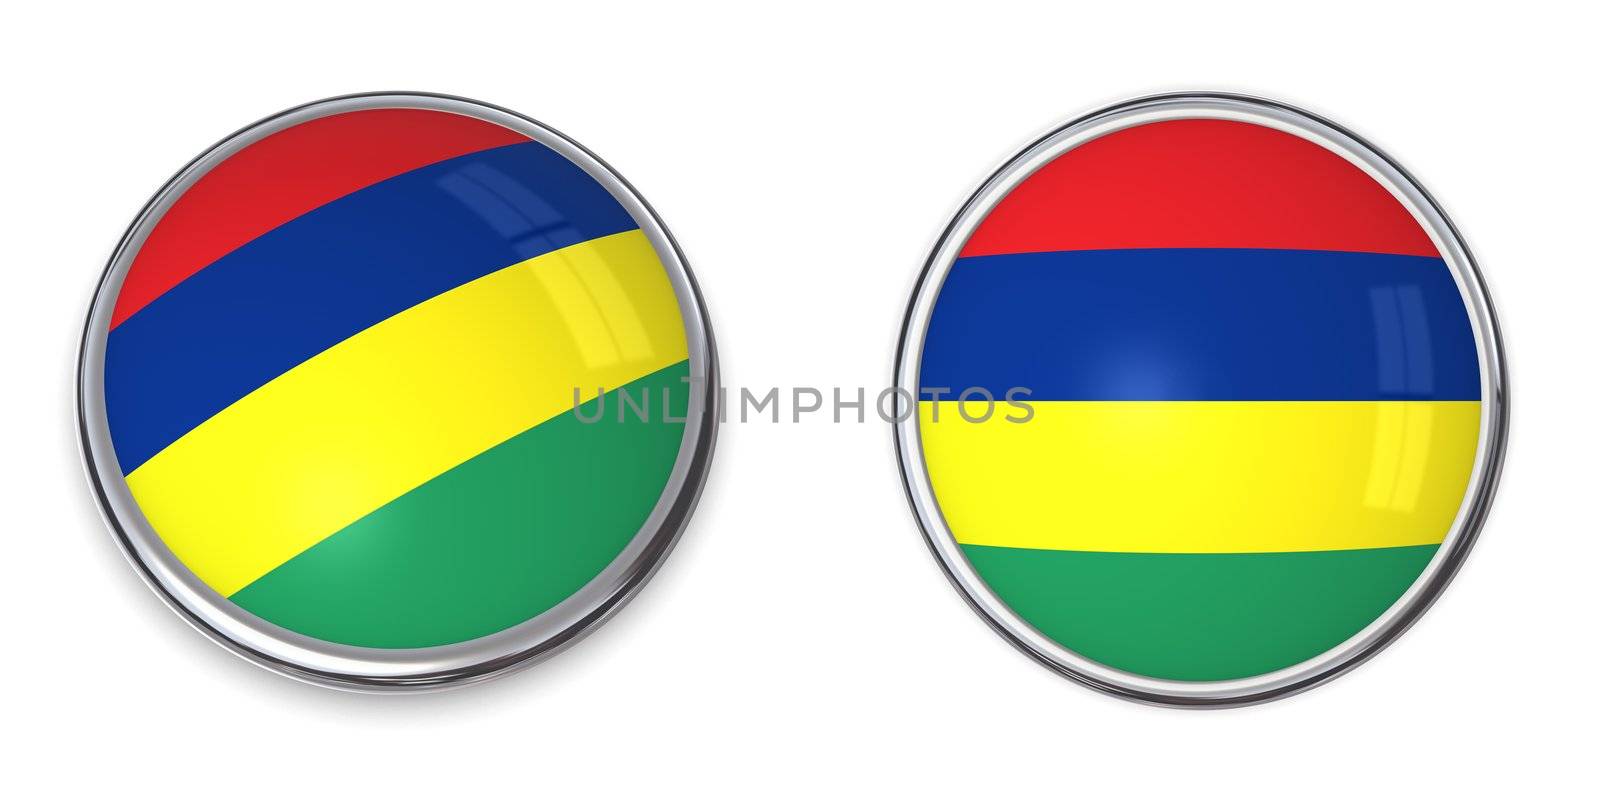 button style banner in 3D of Mauritius